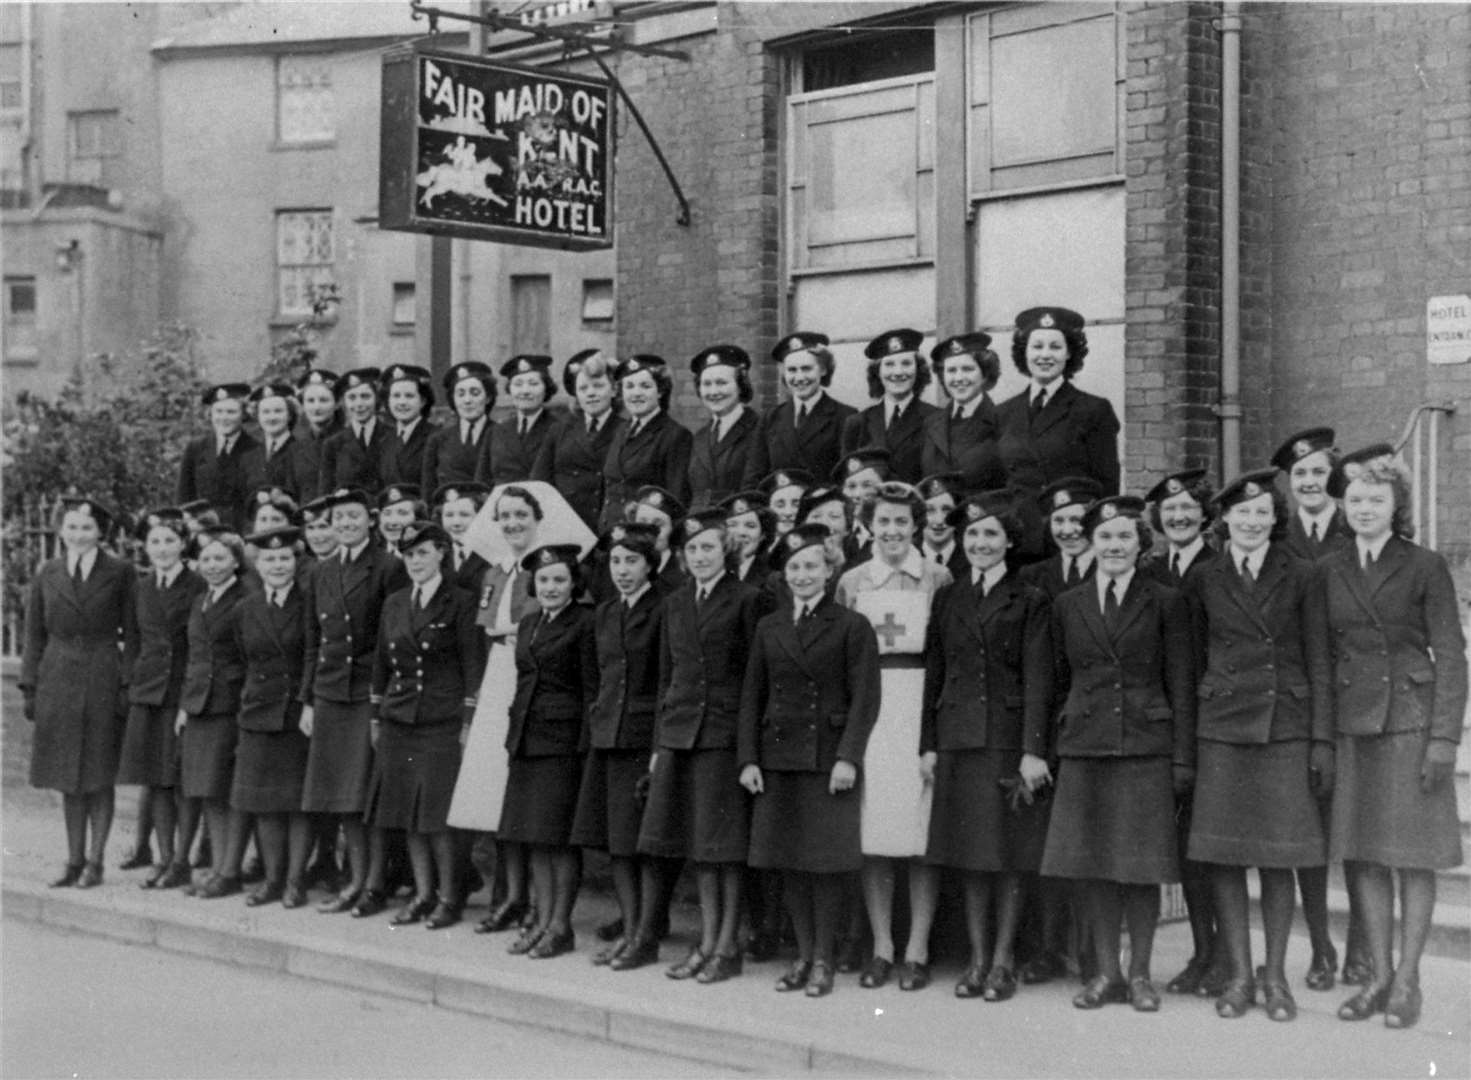 From 1941, even women had to join up. These are Royal Marine Wrens at Walmer